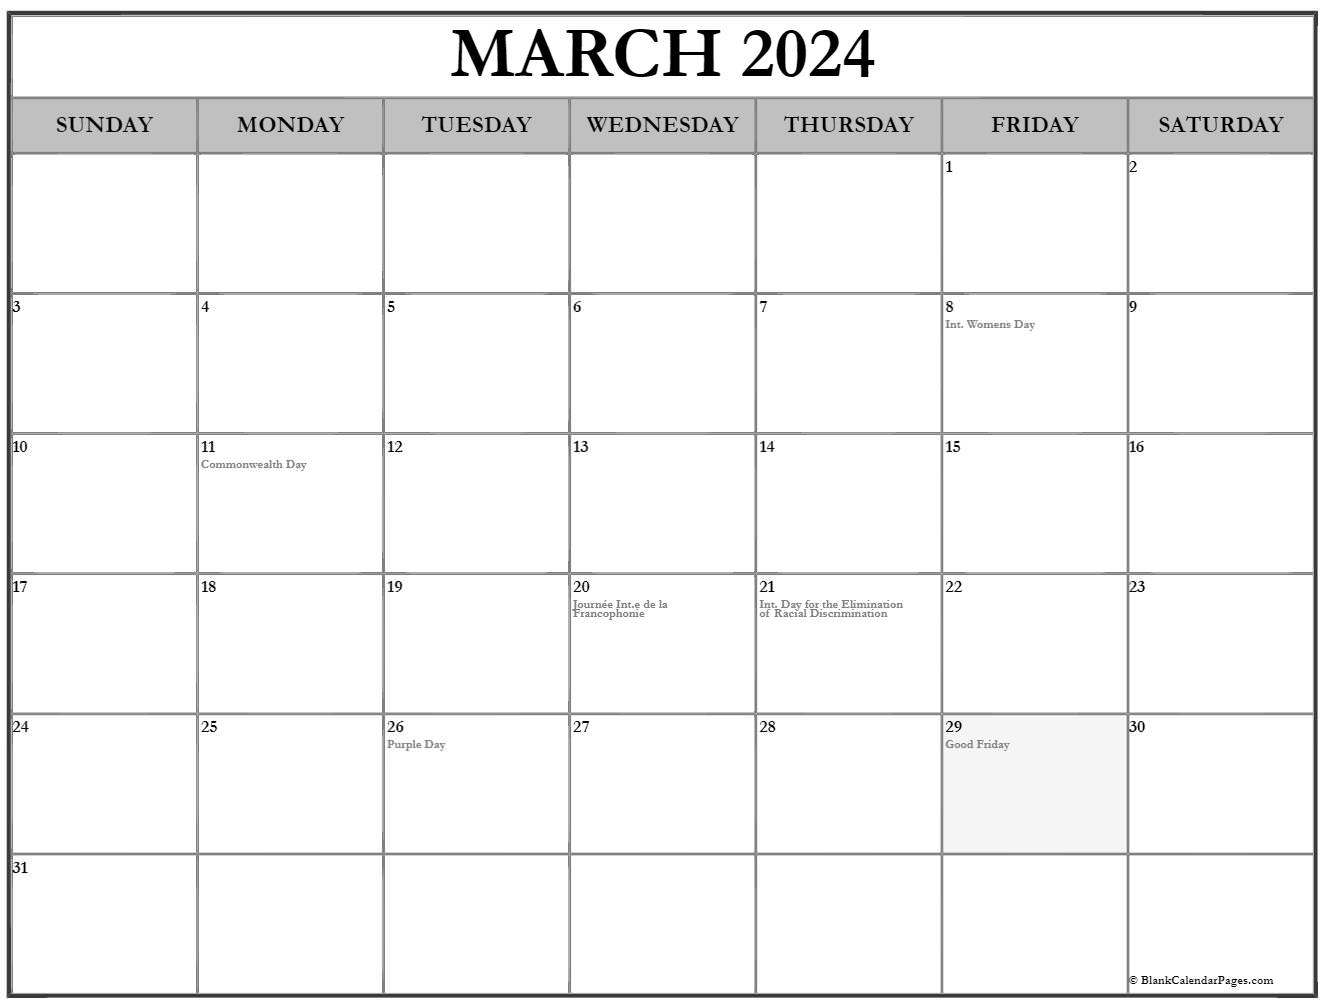 March 2024 Uk Calendar With Holidays For Printing Image Format www